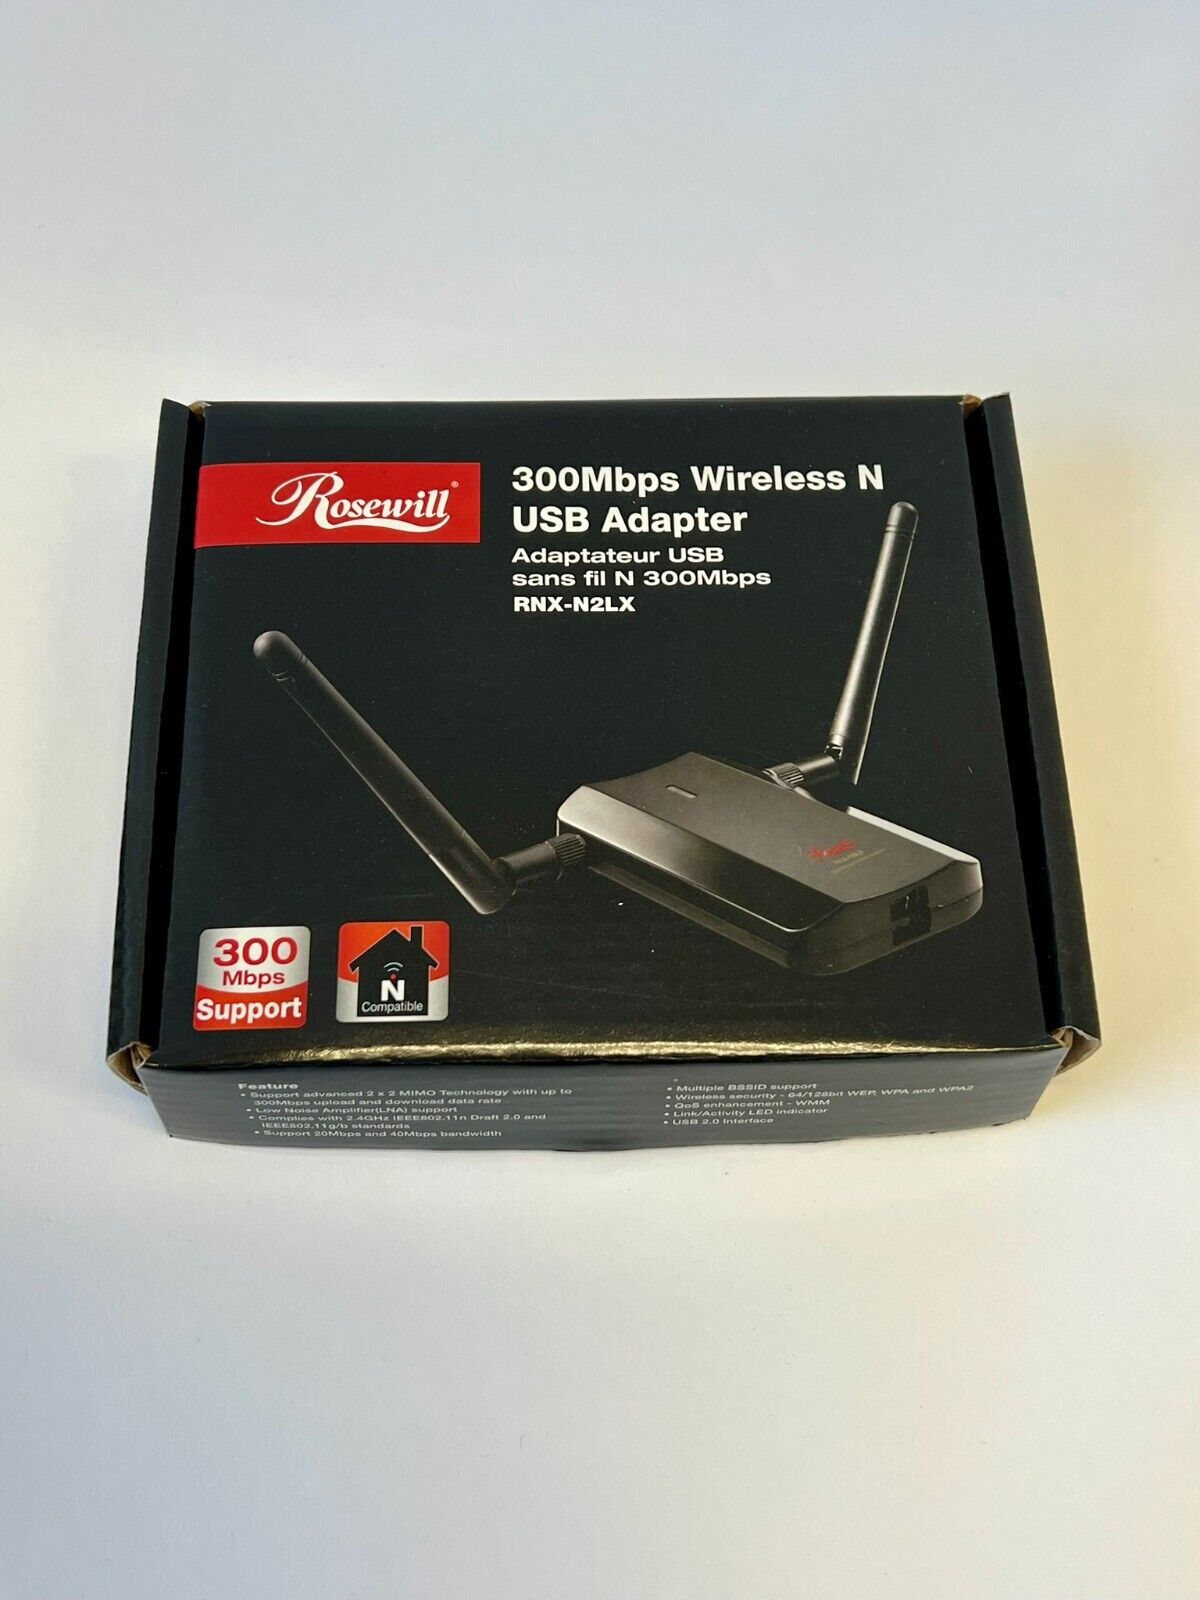 Rosewill RNX-N2LX Wireless N 300Mbps USB Adapter